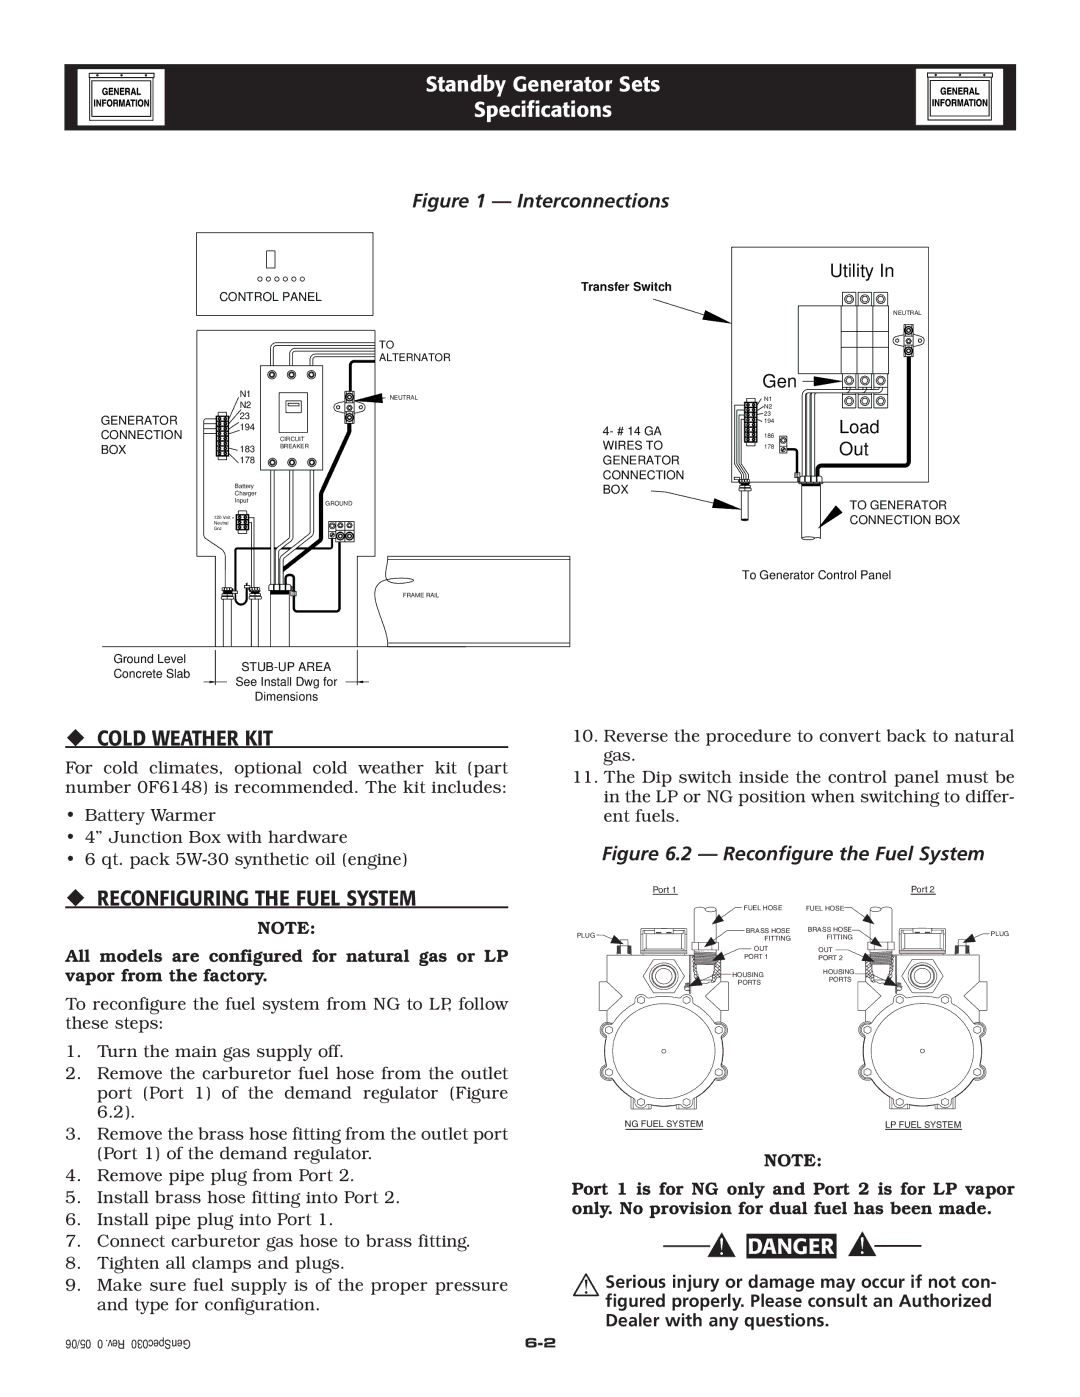 Siemens SG020 owner manual ‹ Cold Weather KIT, ‹ Reconfiguring the Fuel System 